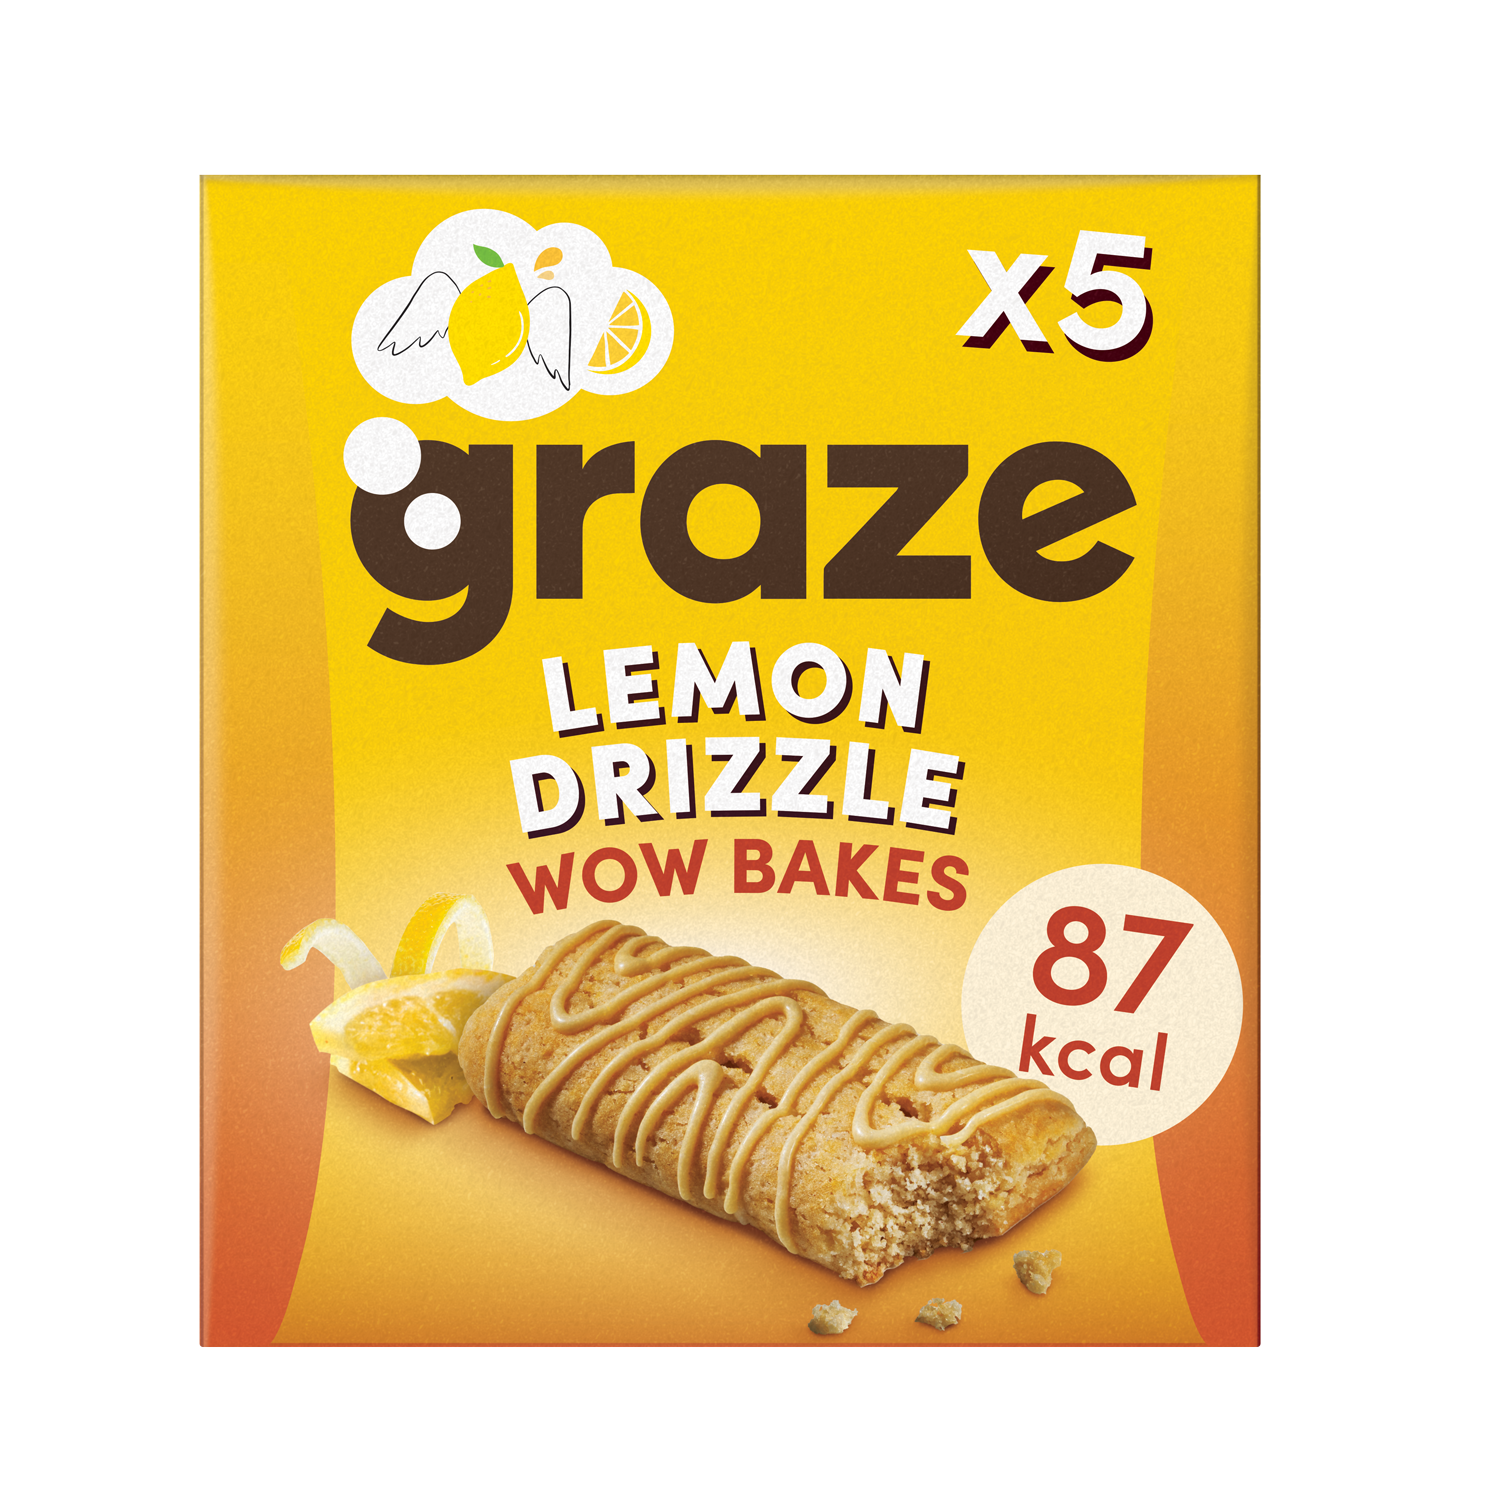 graze announces new and improved Wow Bakes